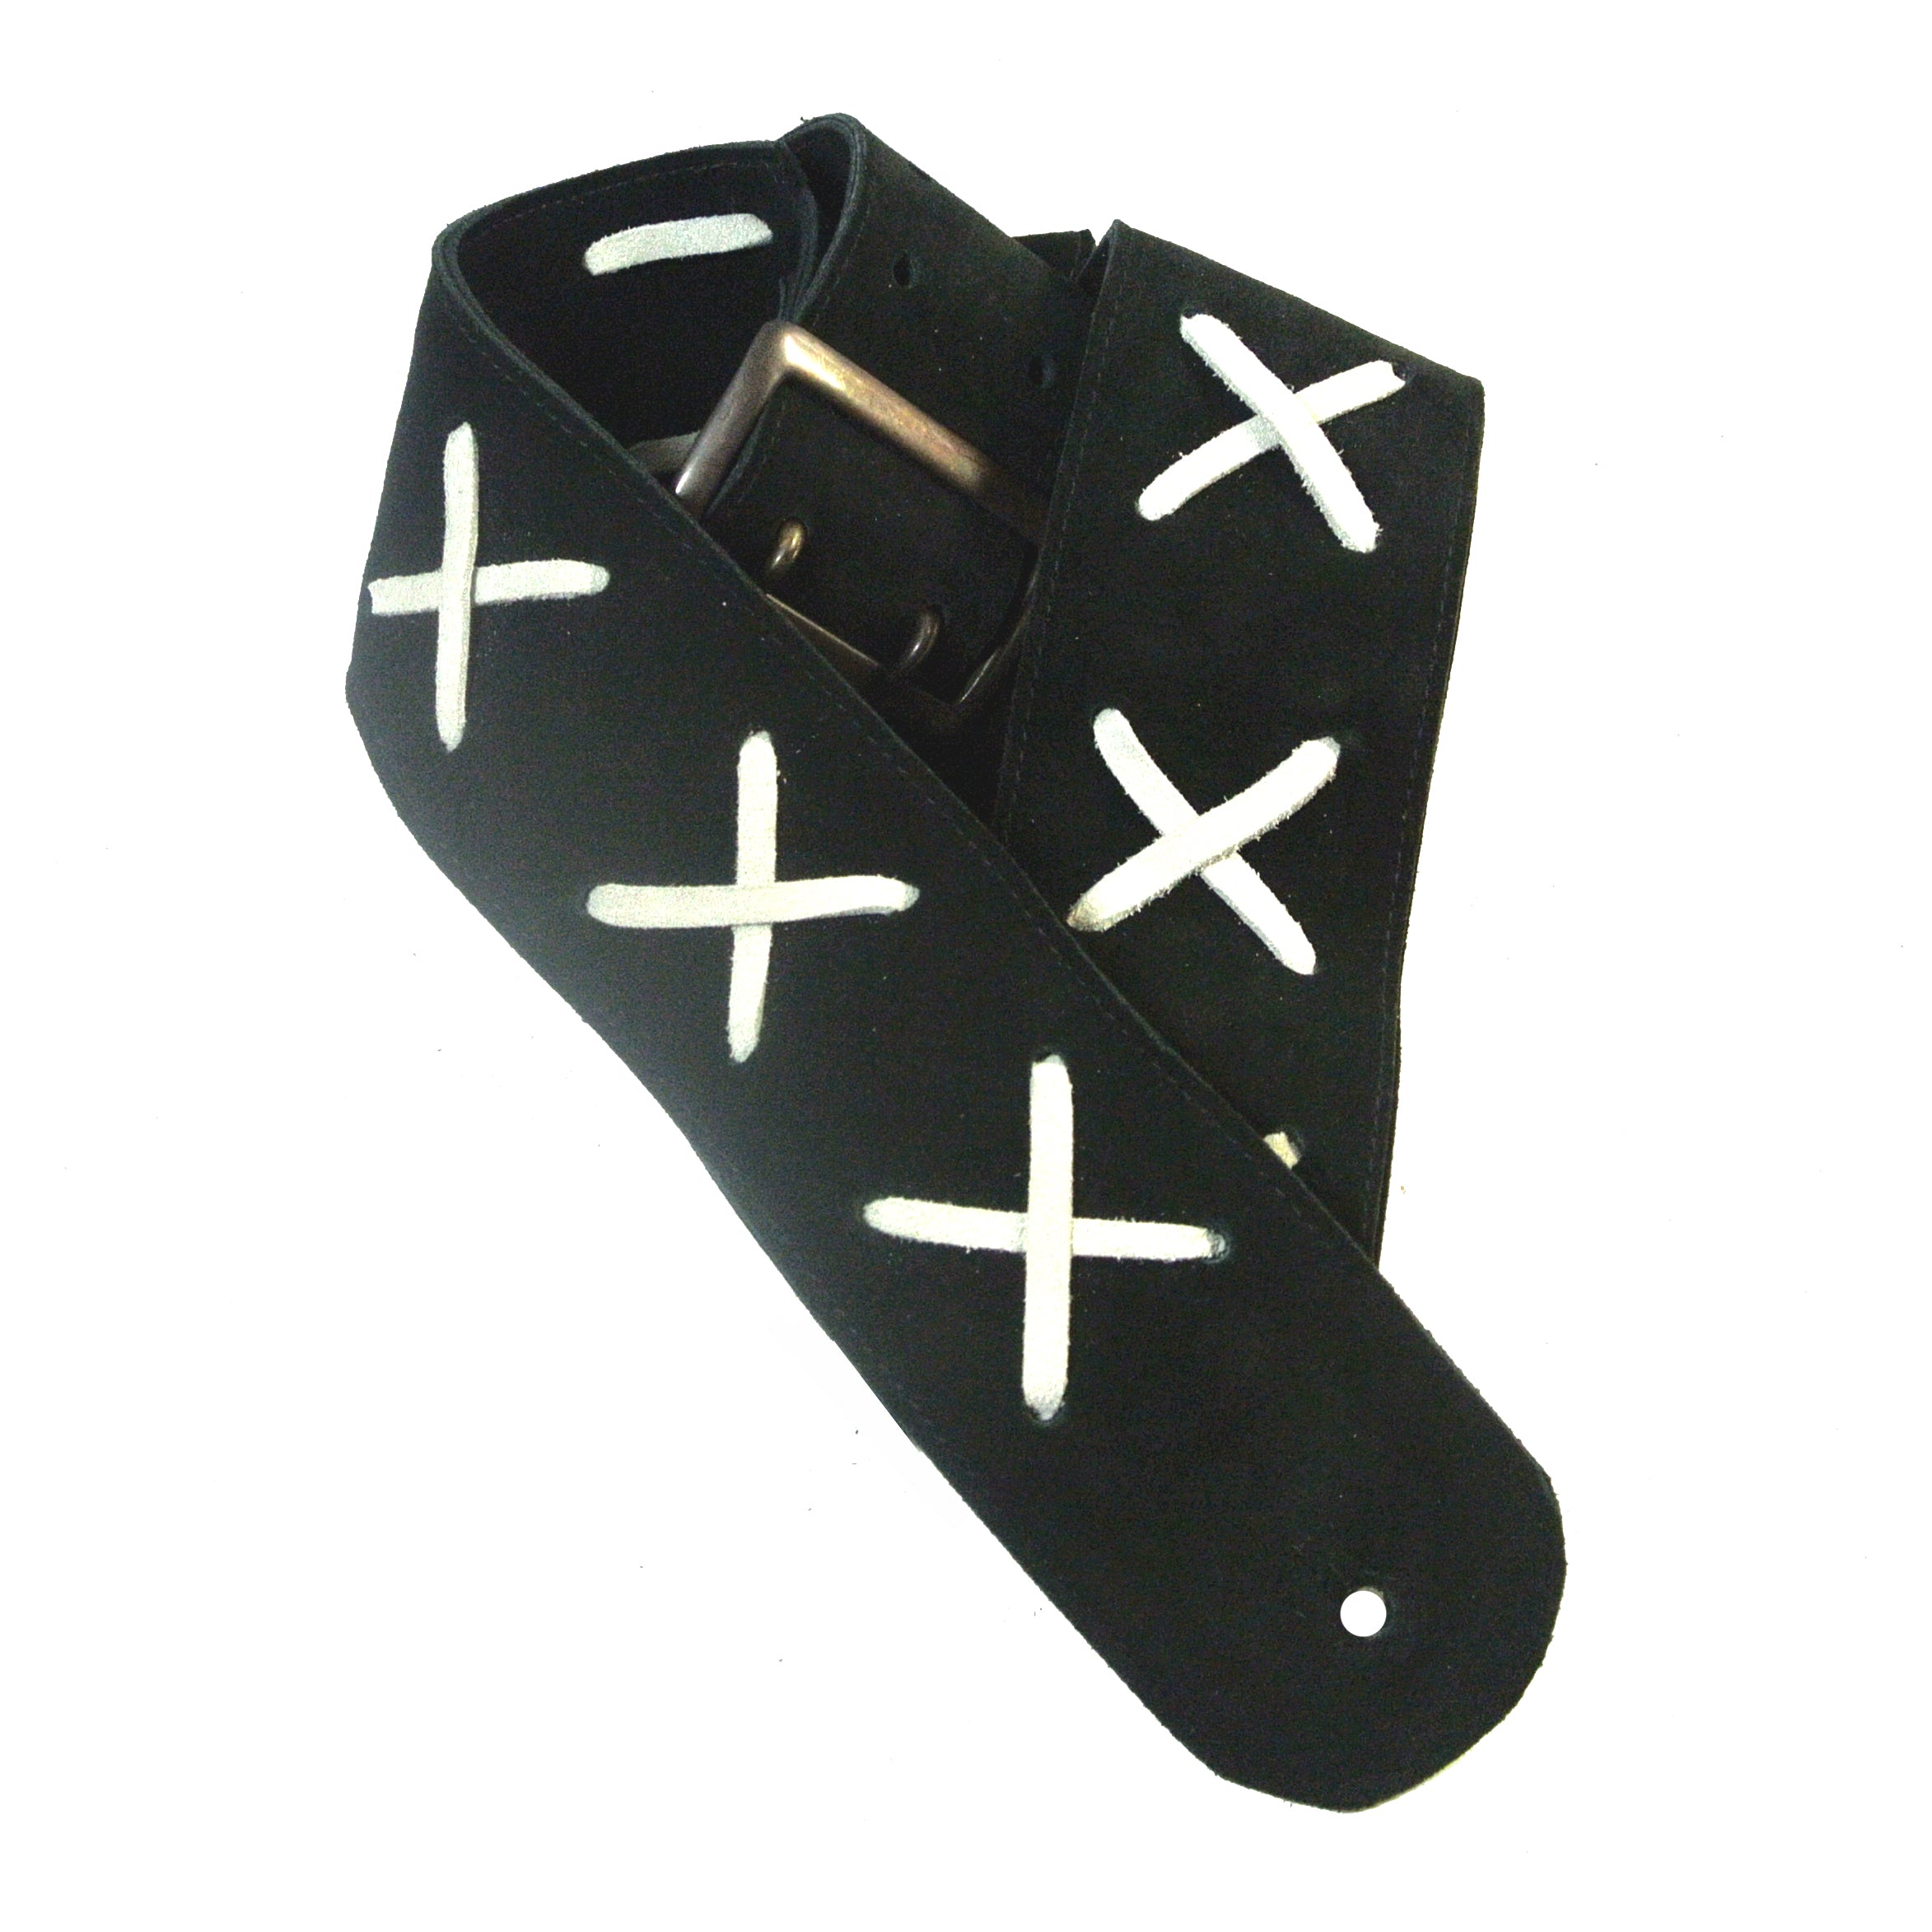 The 'Anthony Gomes Custom Guitar Strap' - Signed and Numbered - ONLY 10 AVAILABLE